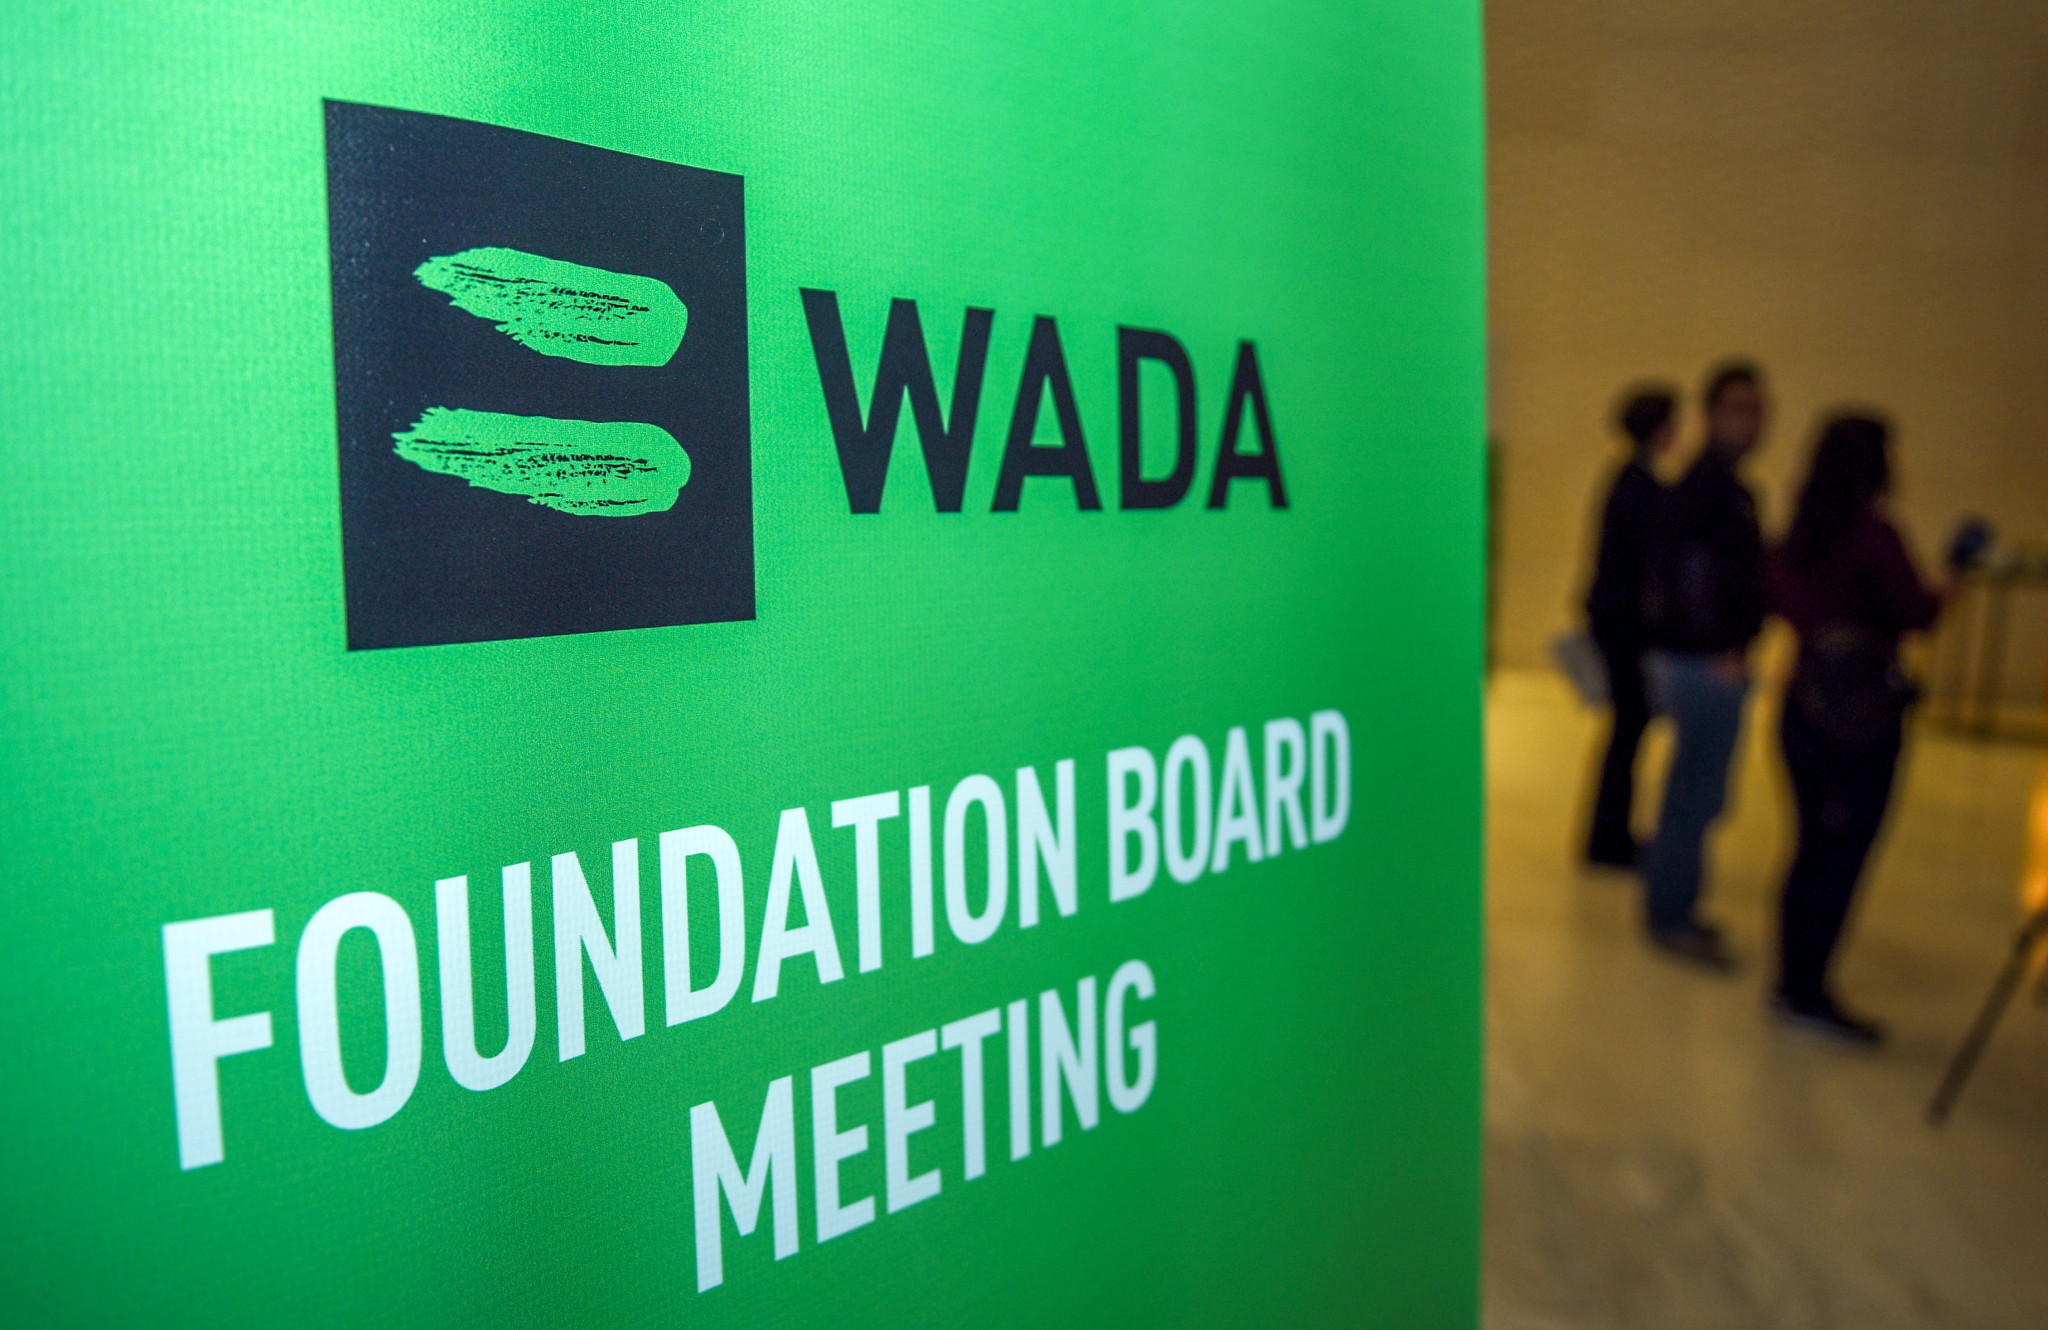 Executive Committee expansion and installing independent President among governance reforms approved by WADA